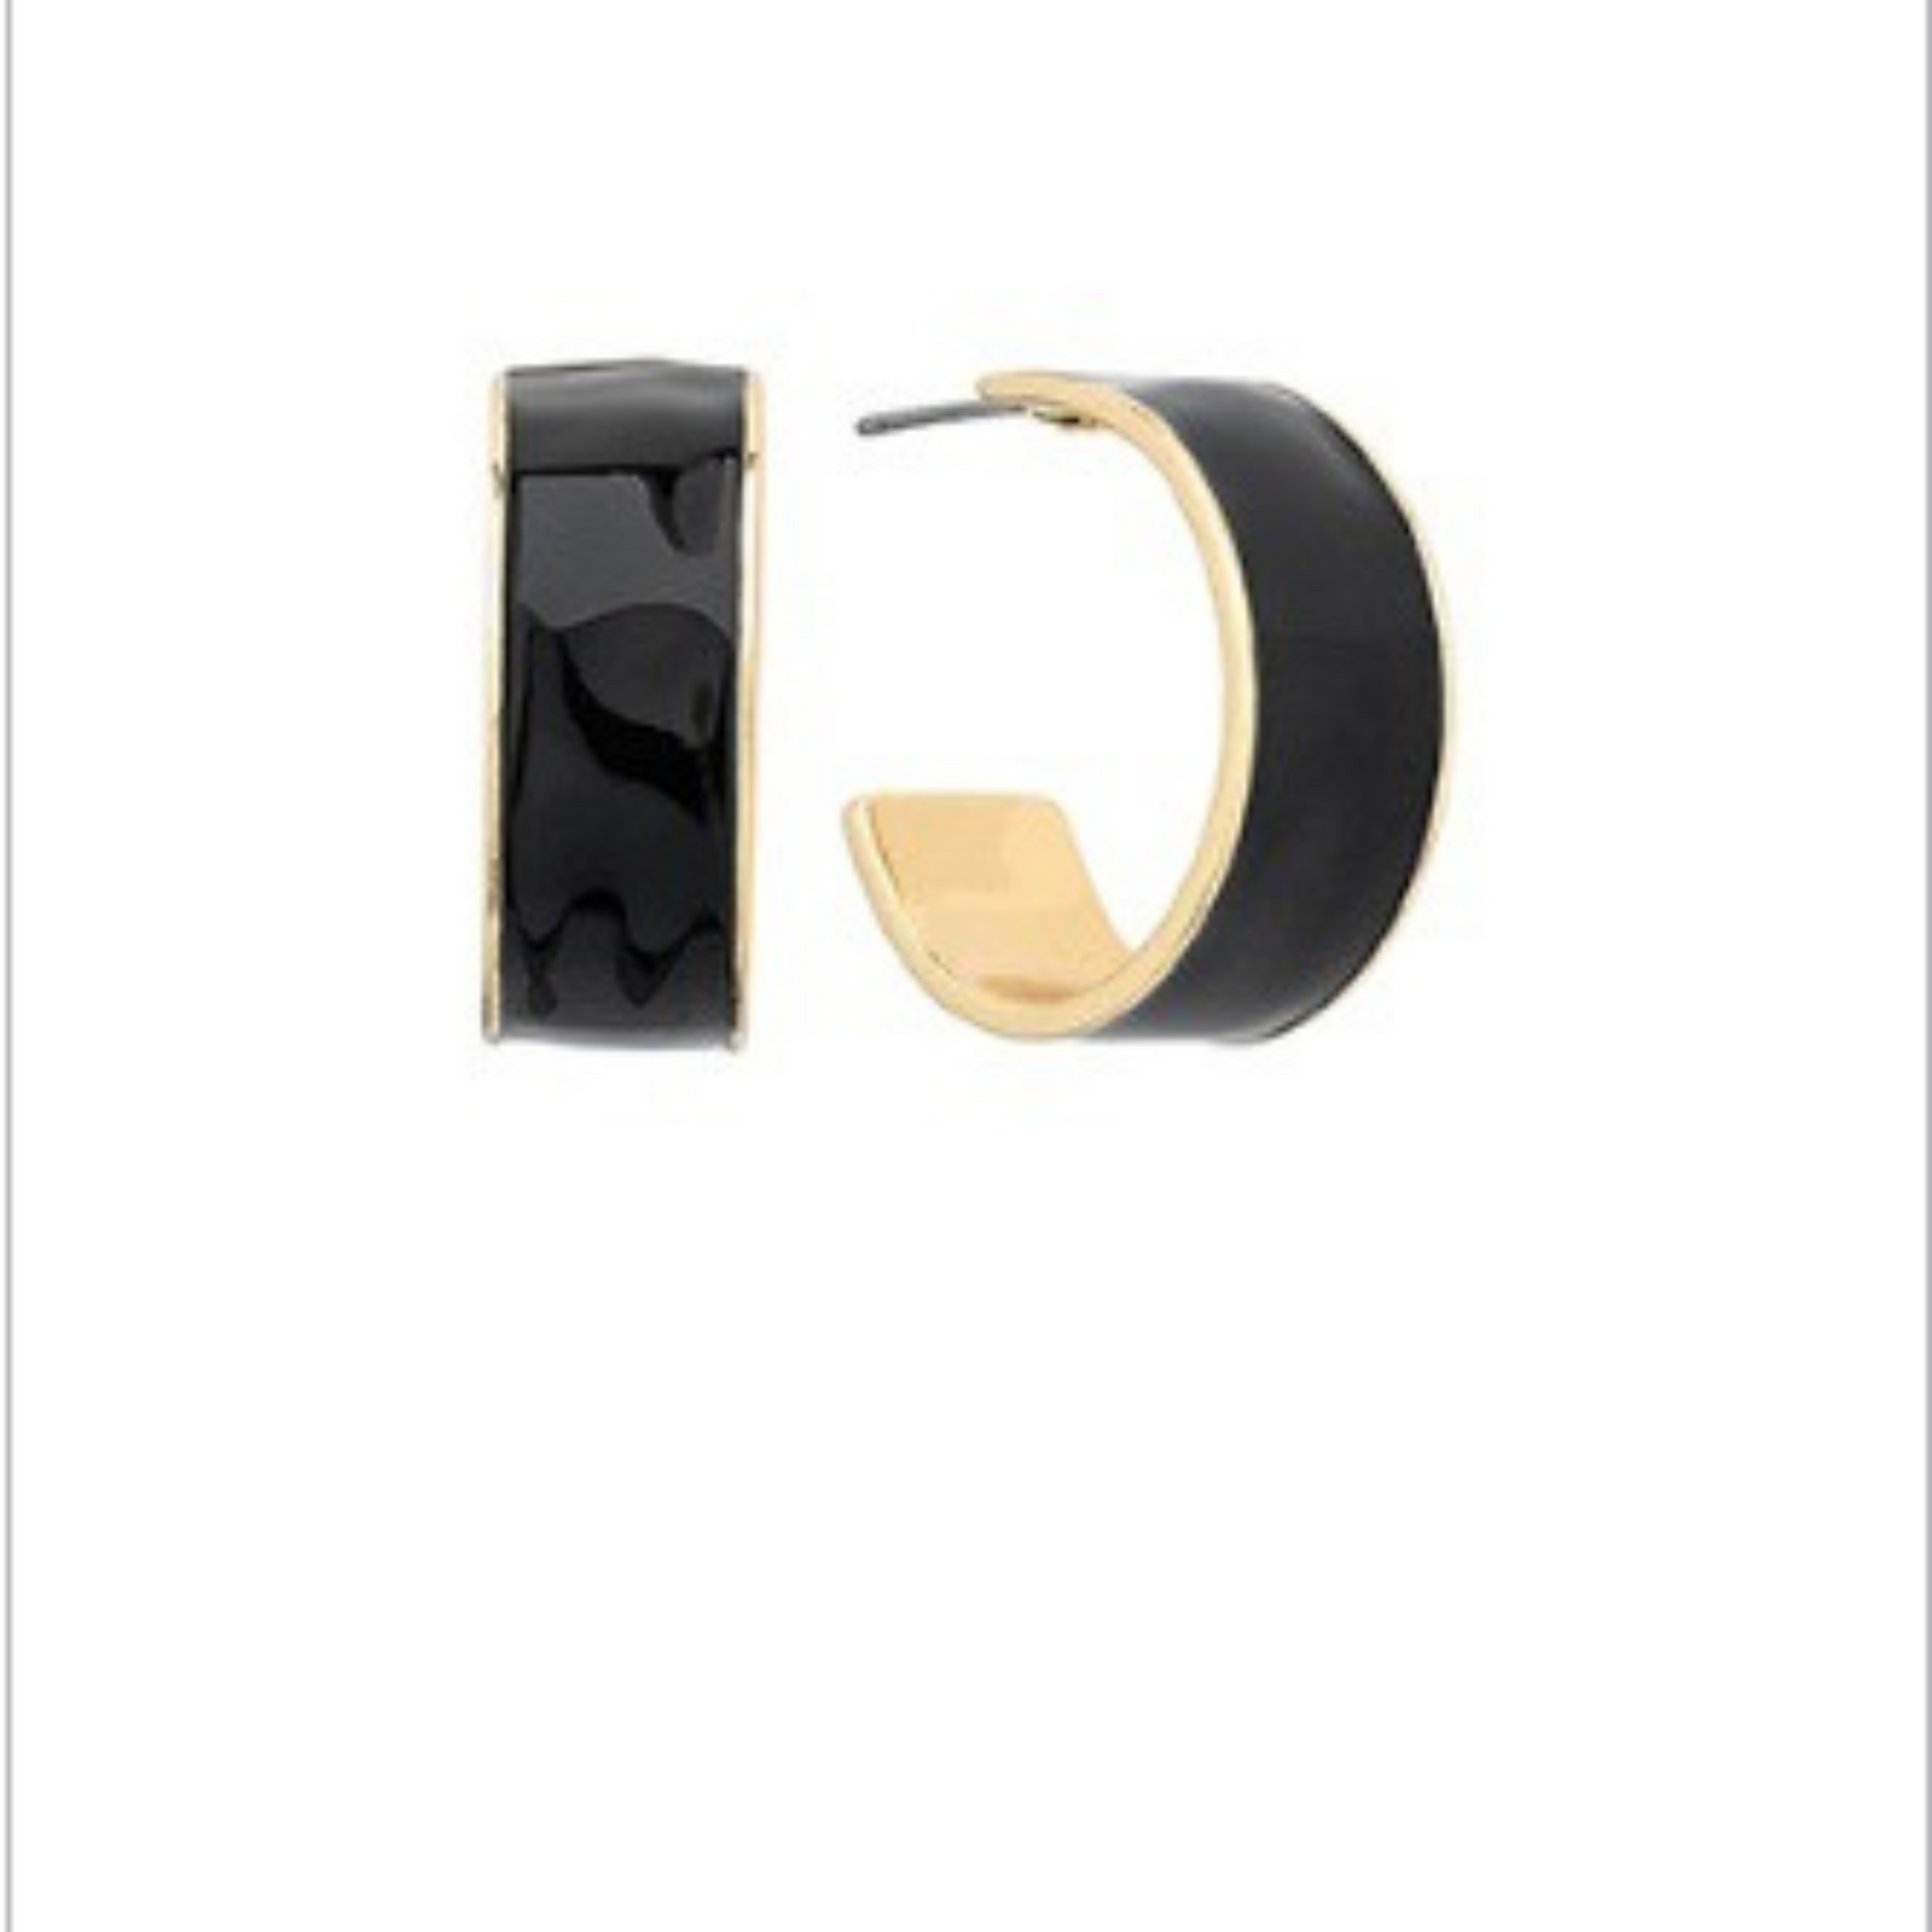 22 mm colored metal hoops in black and gold